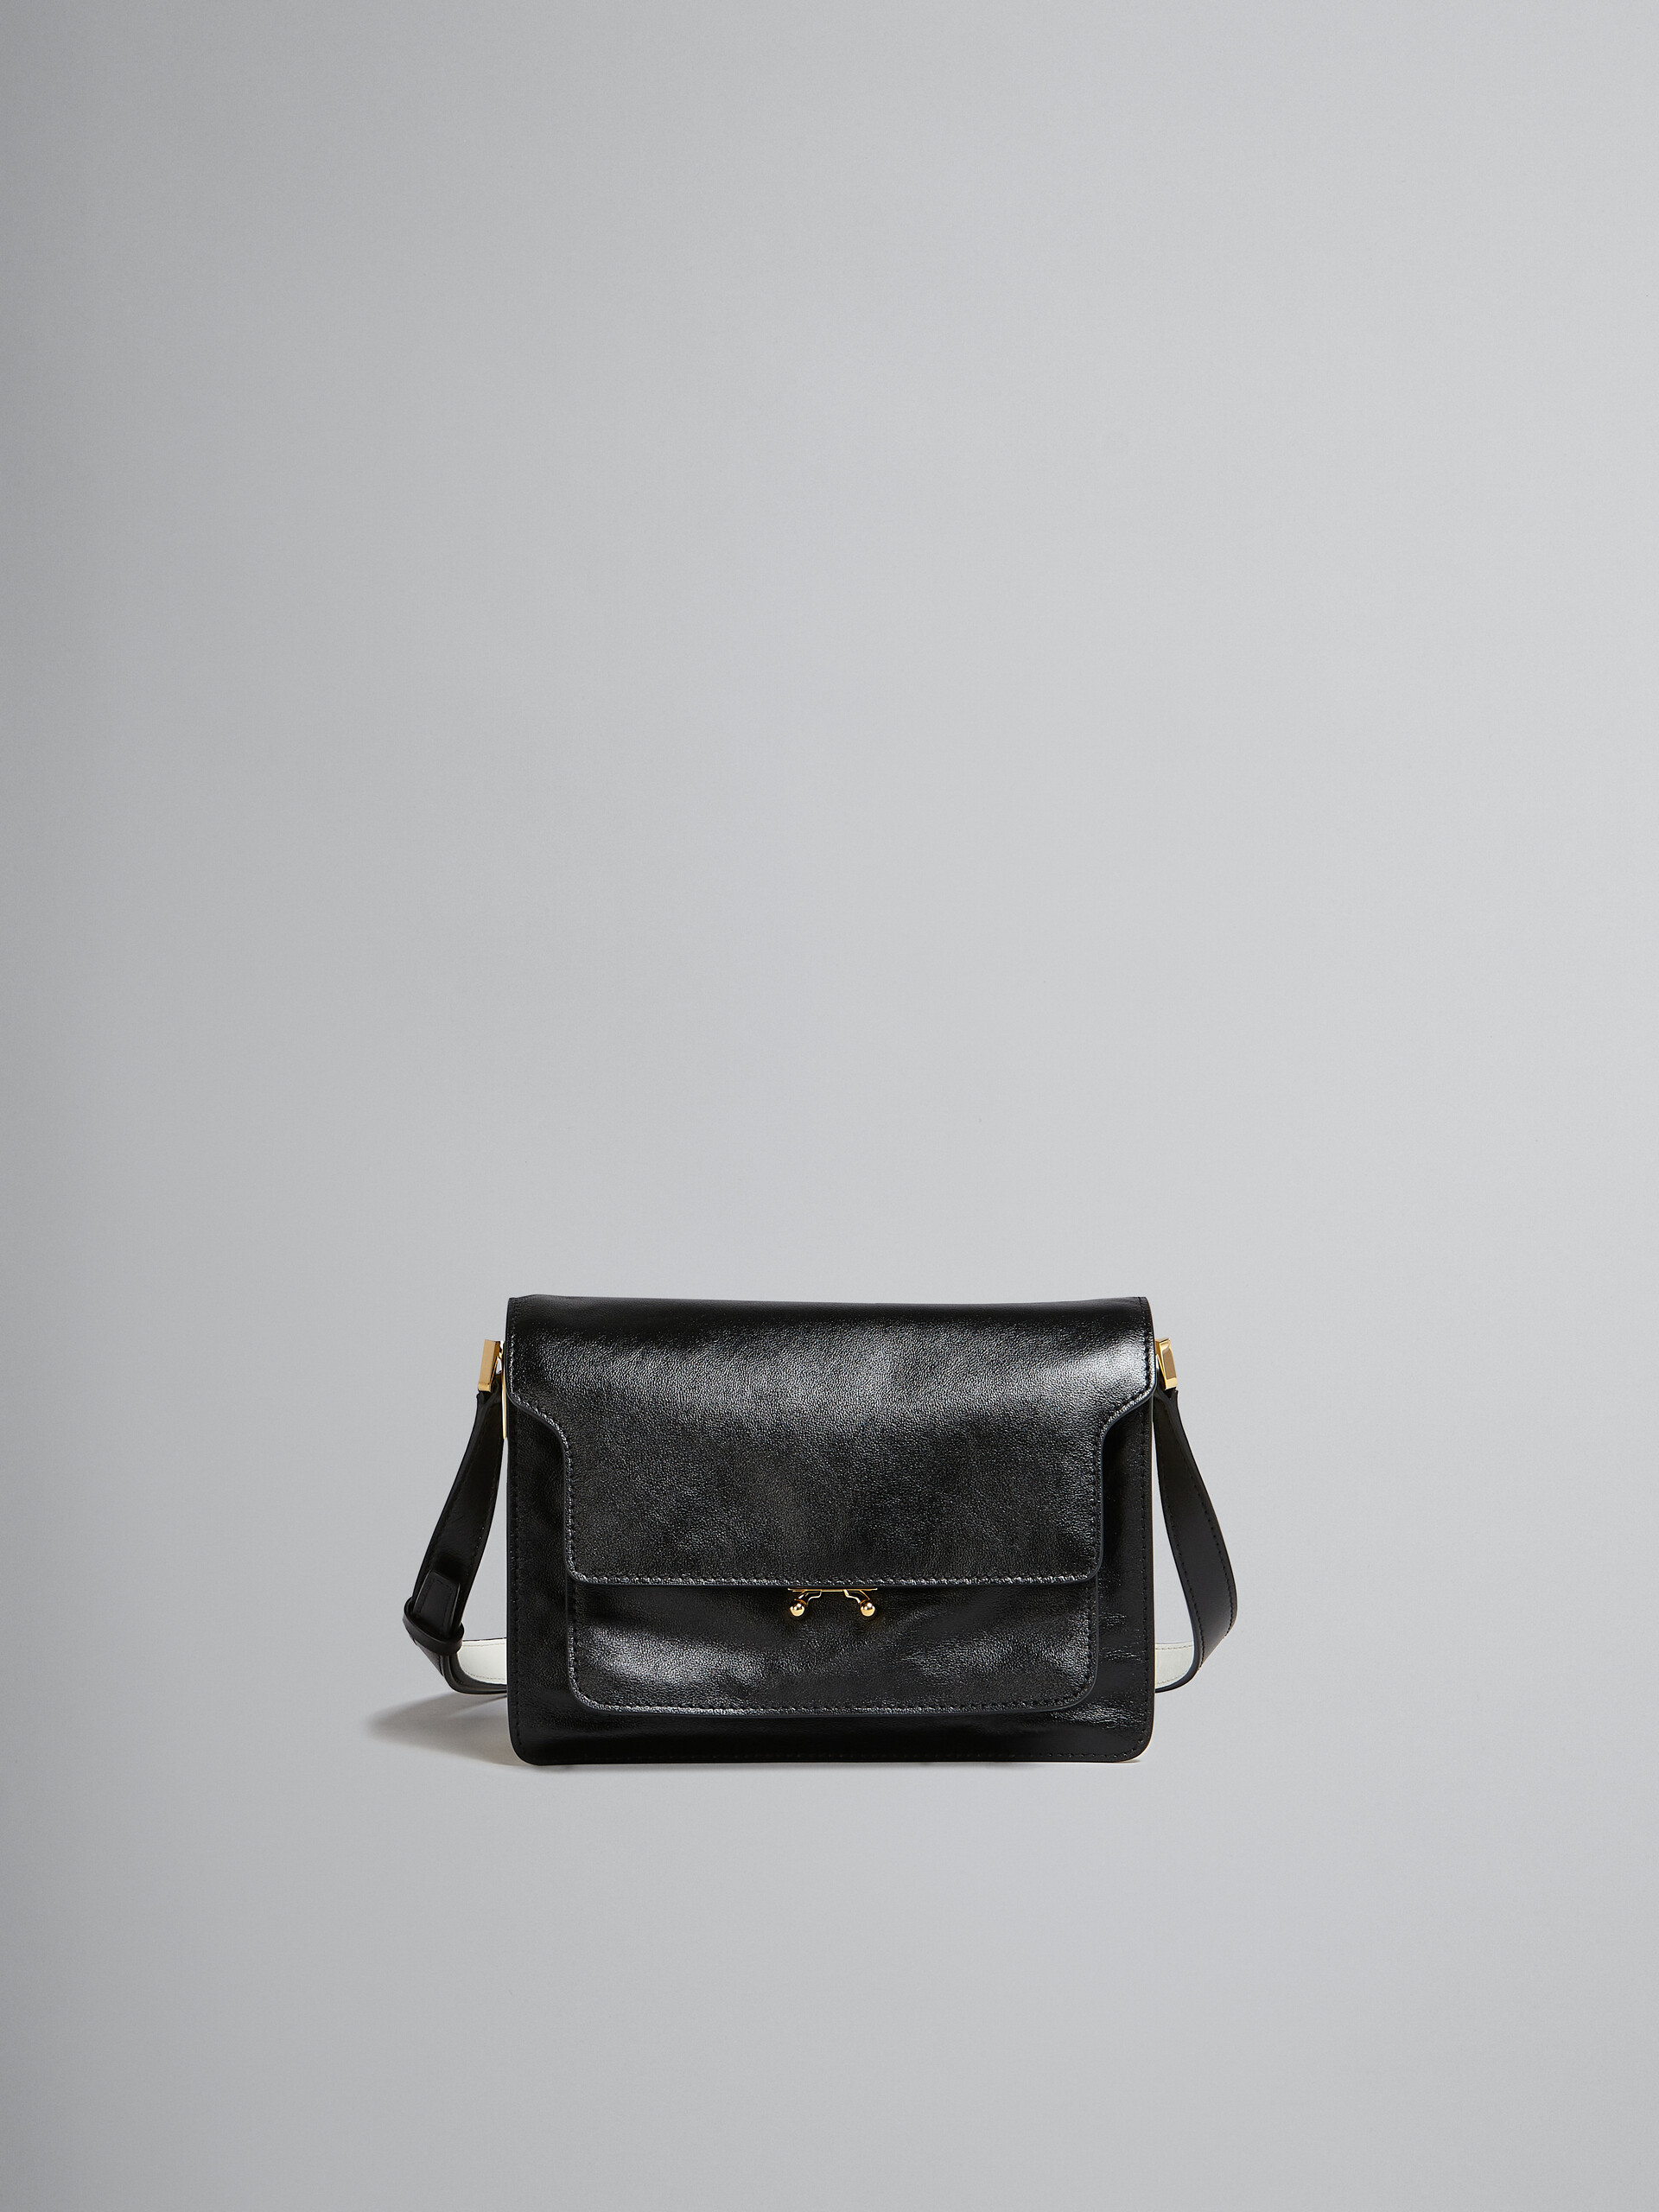 Trunk Soft Medium Bag in black and white leather - Shoulder Bags - Image 1